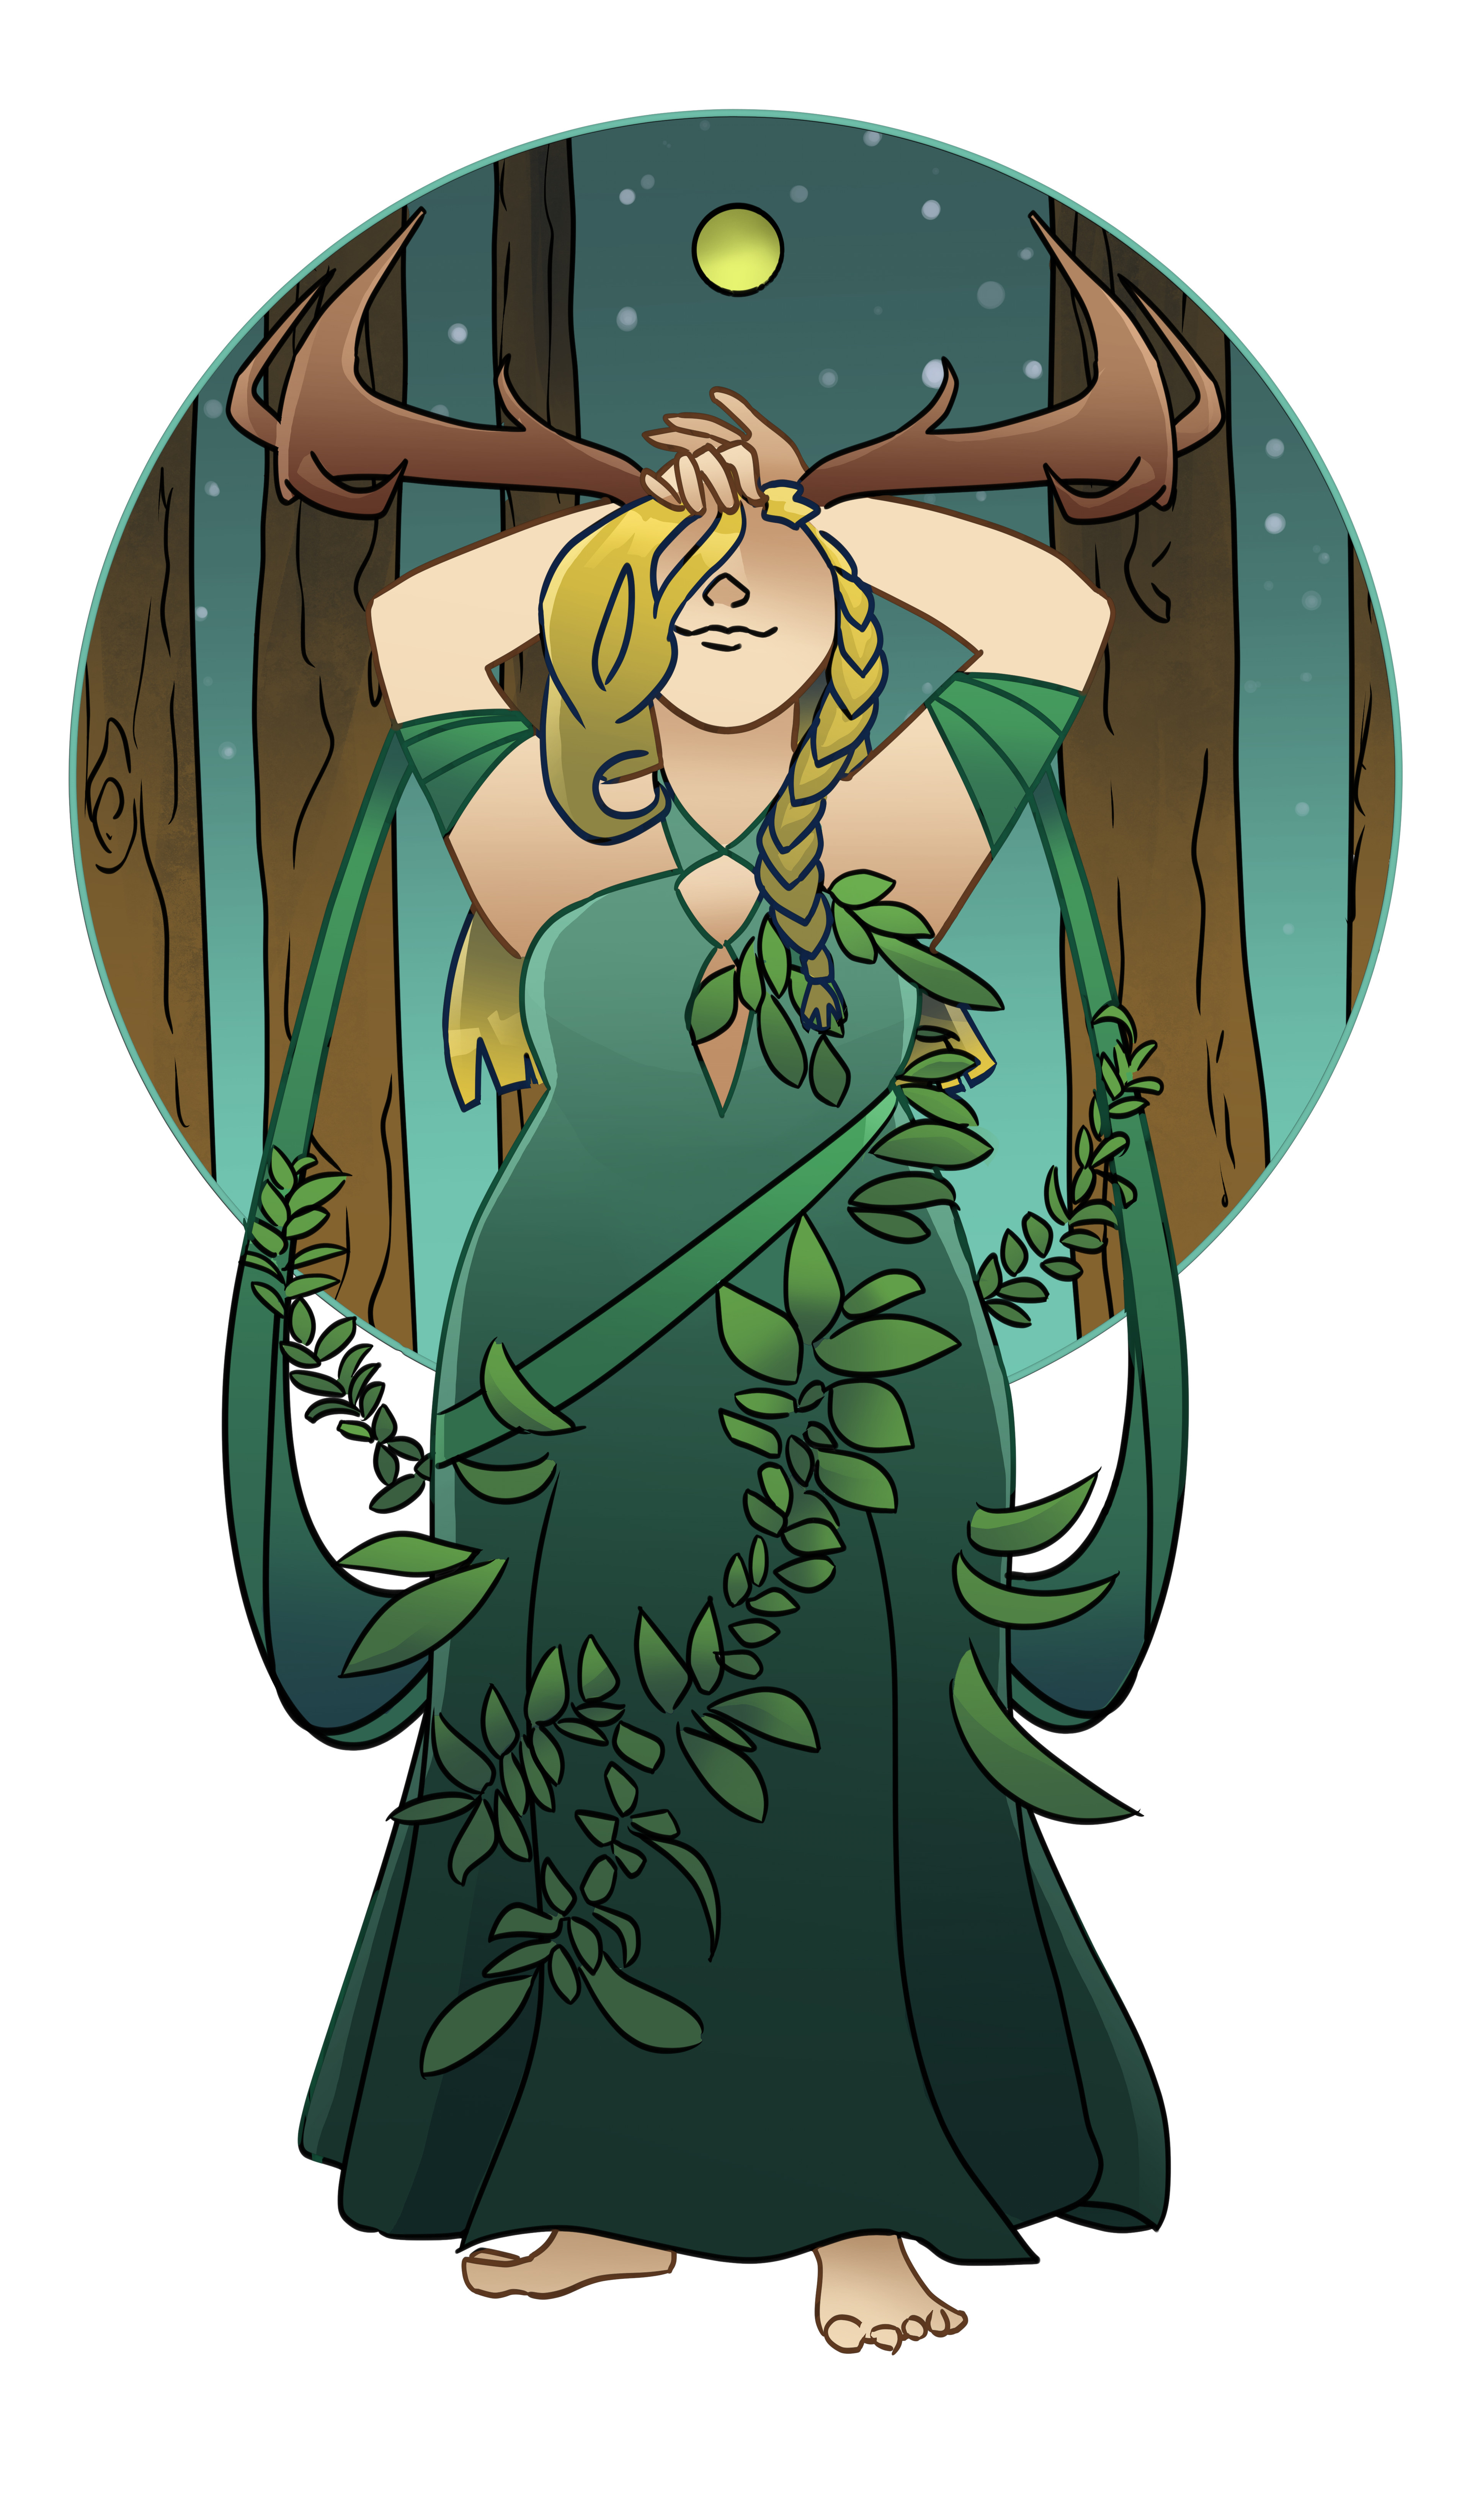 Illustration of a woman as a forest goddess.